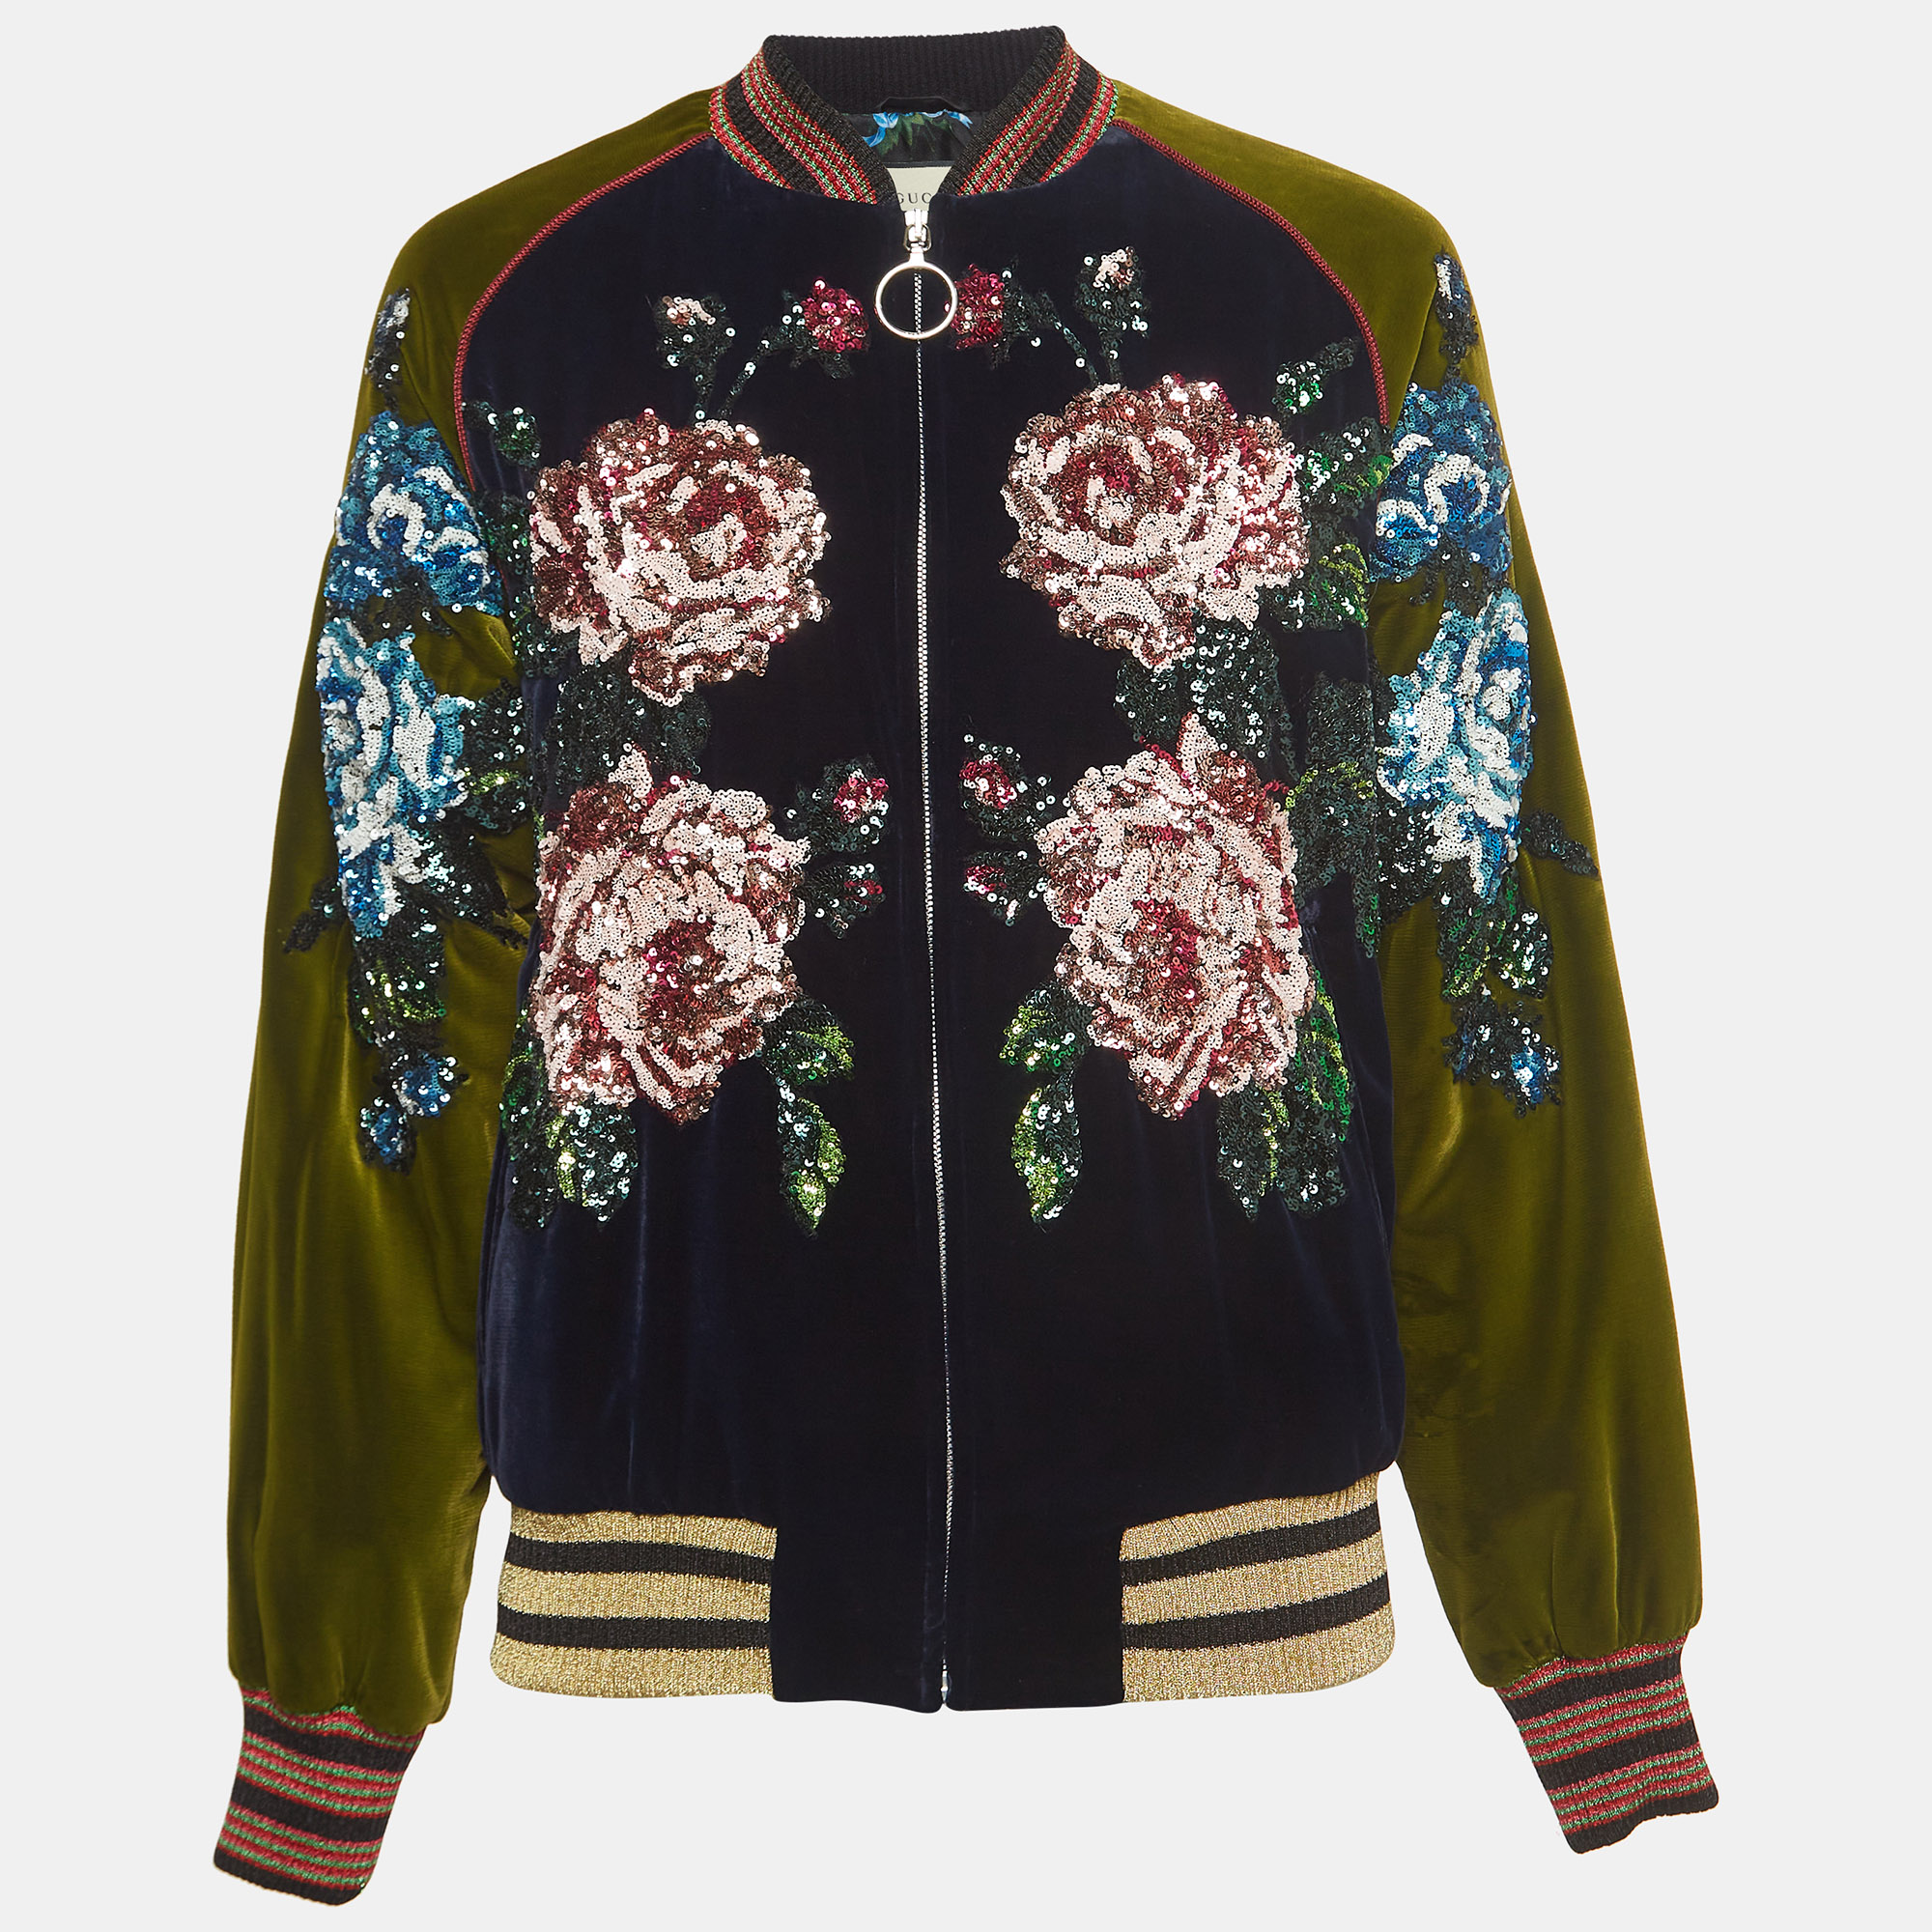 Gucci navy blue/green floral sequined bomber jacket m